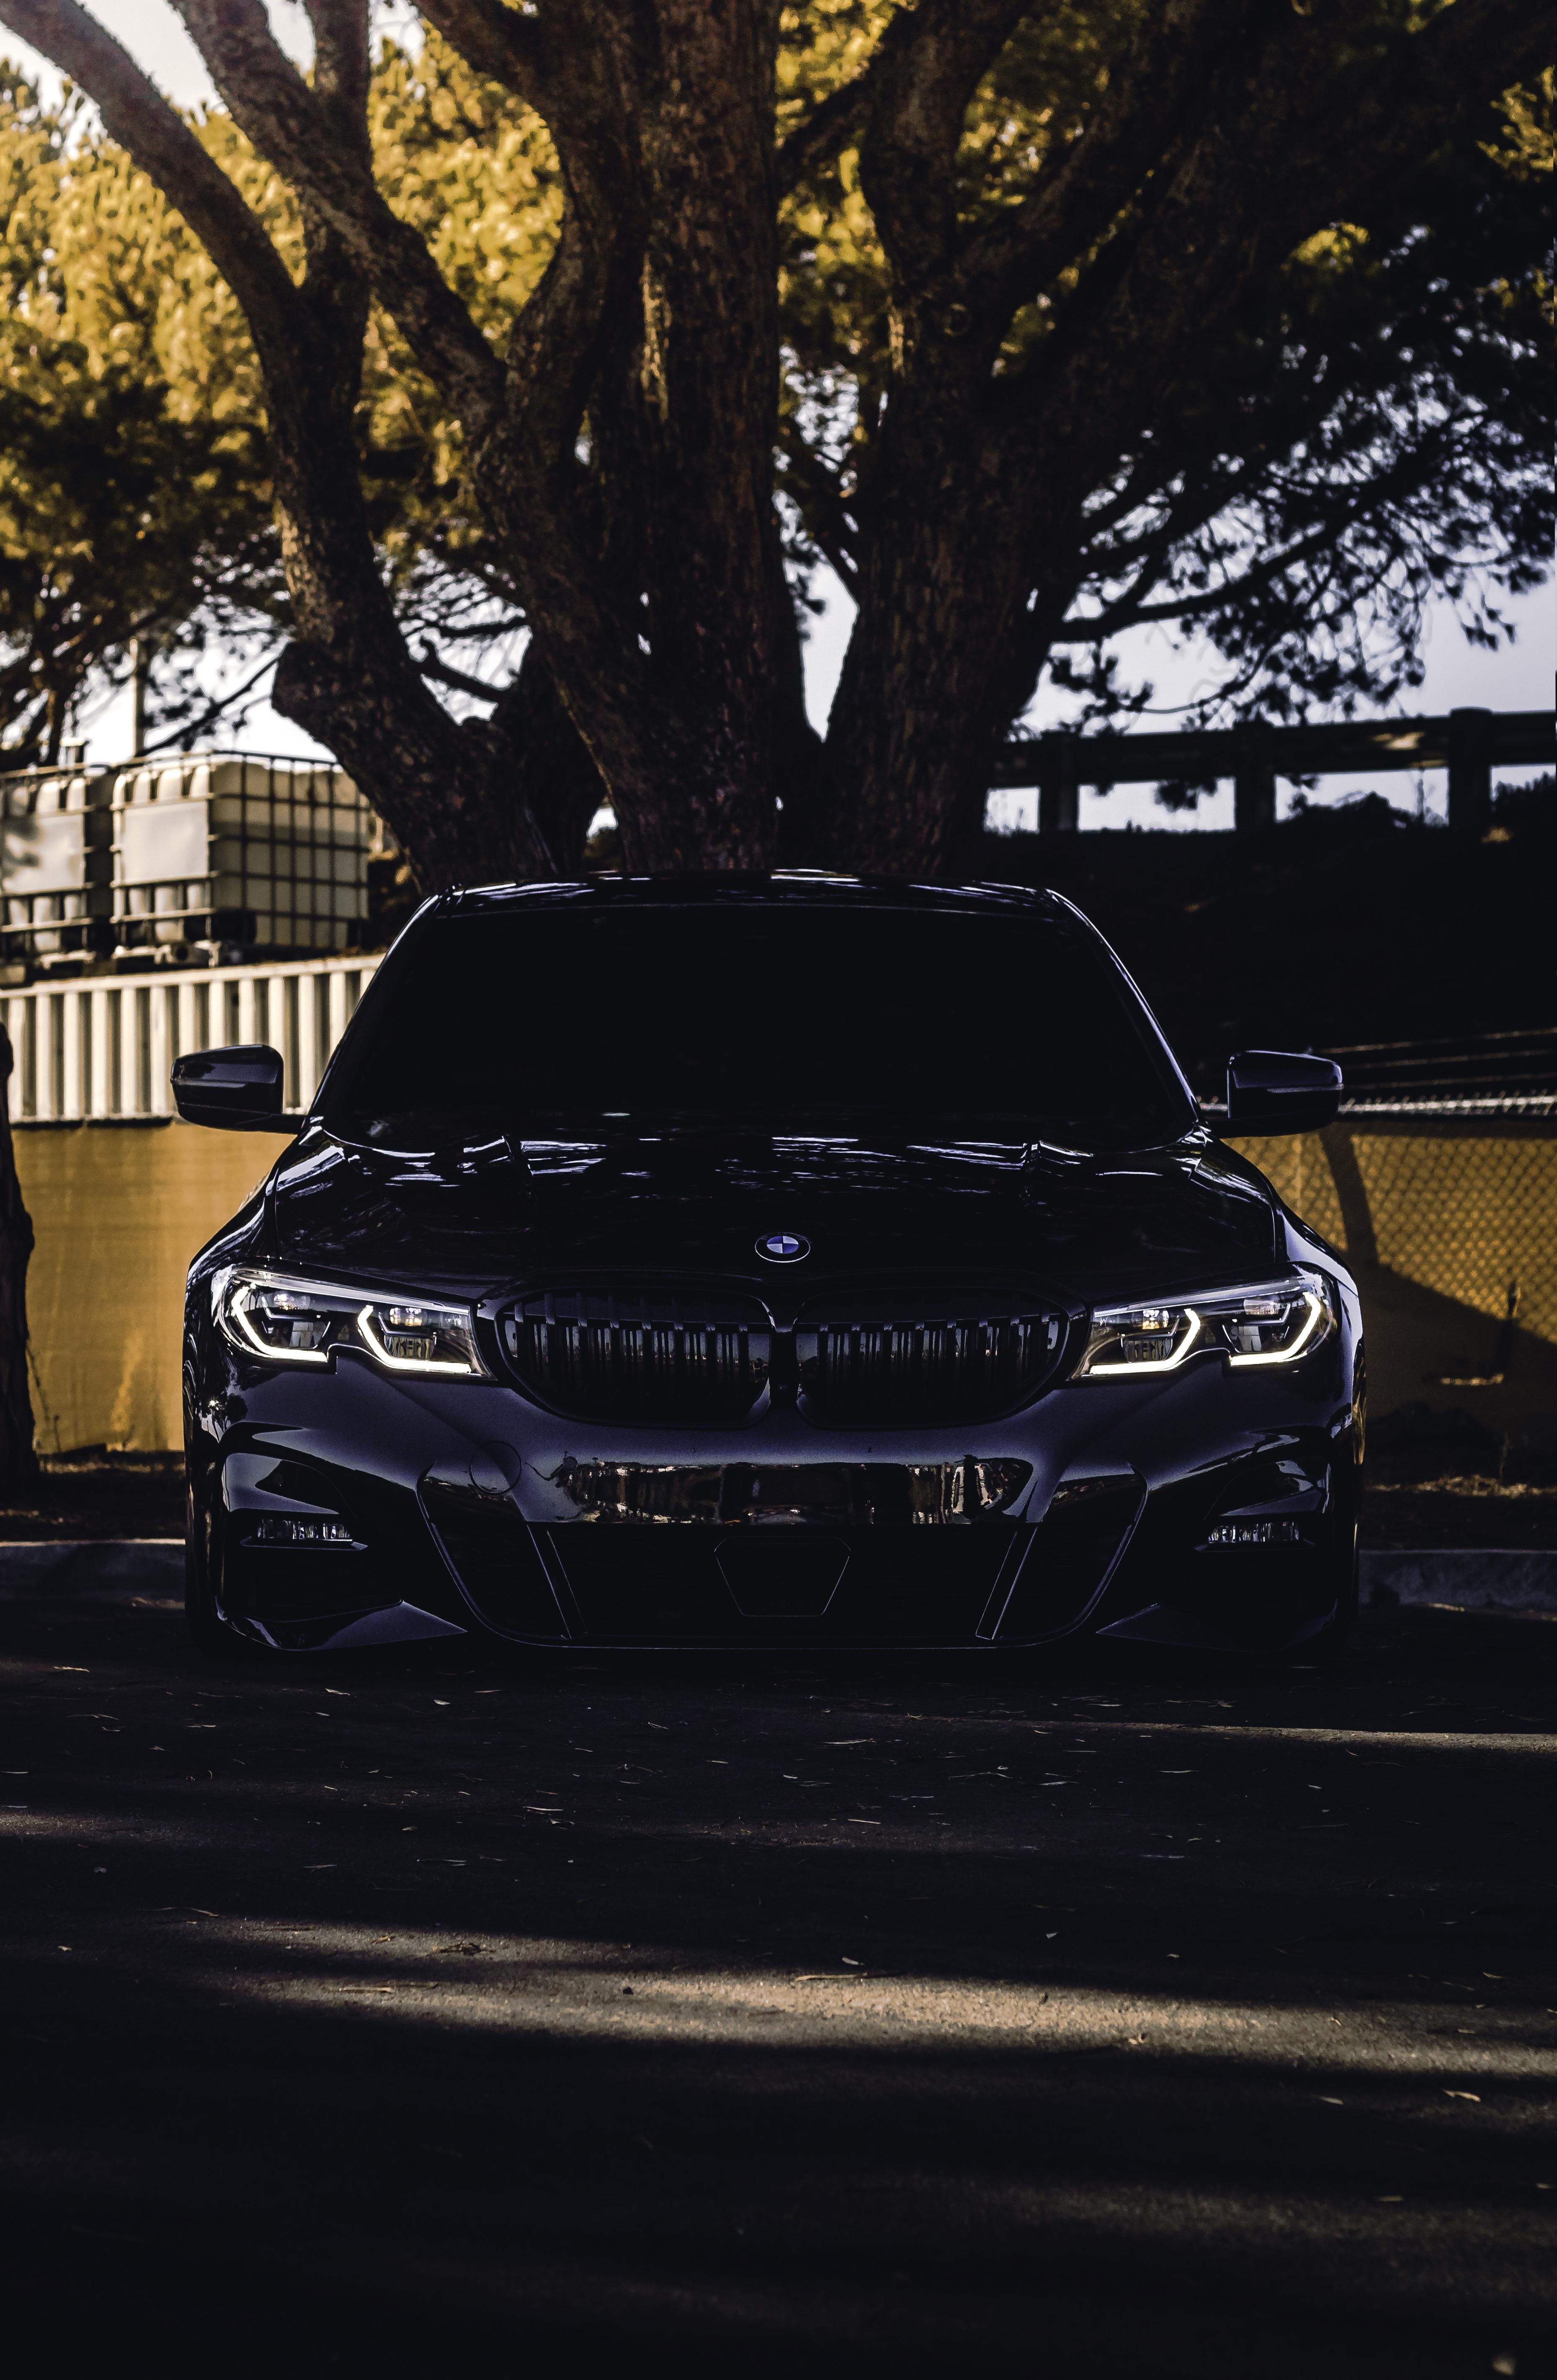 Took a picture of my friends G20 330i. Dream cars bmw, Bmw, Bmw g20